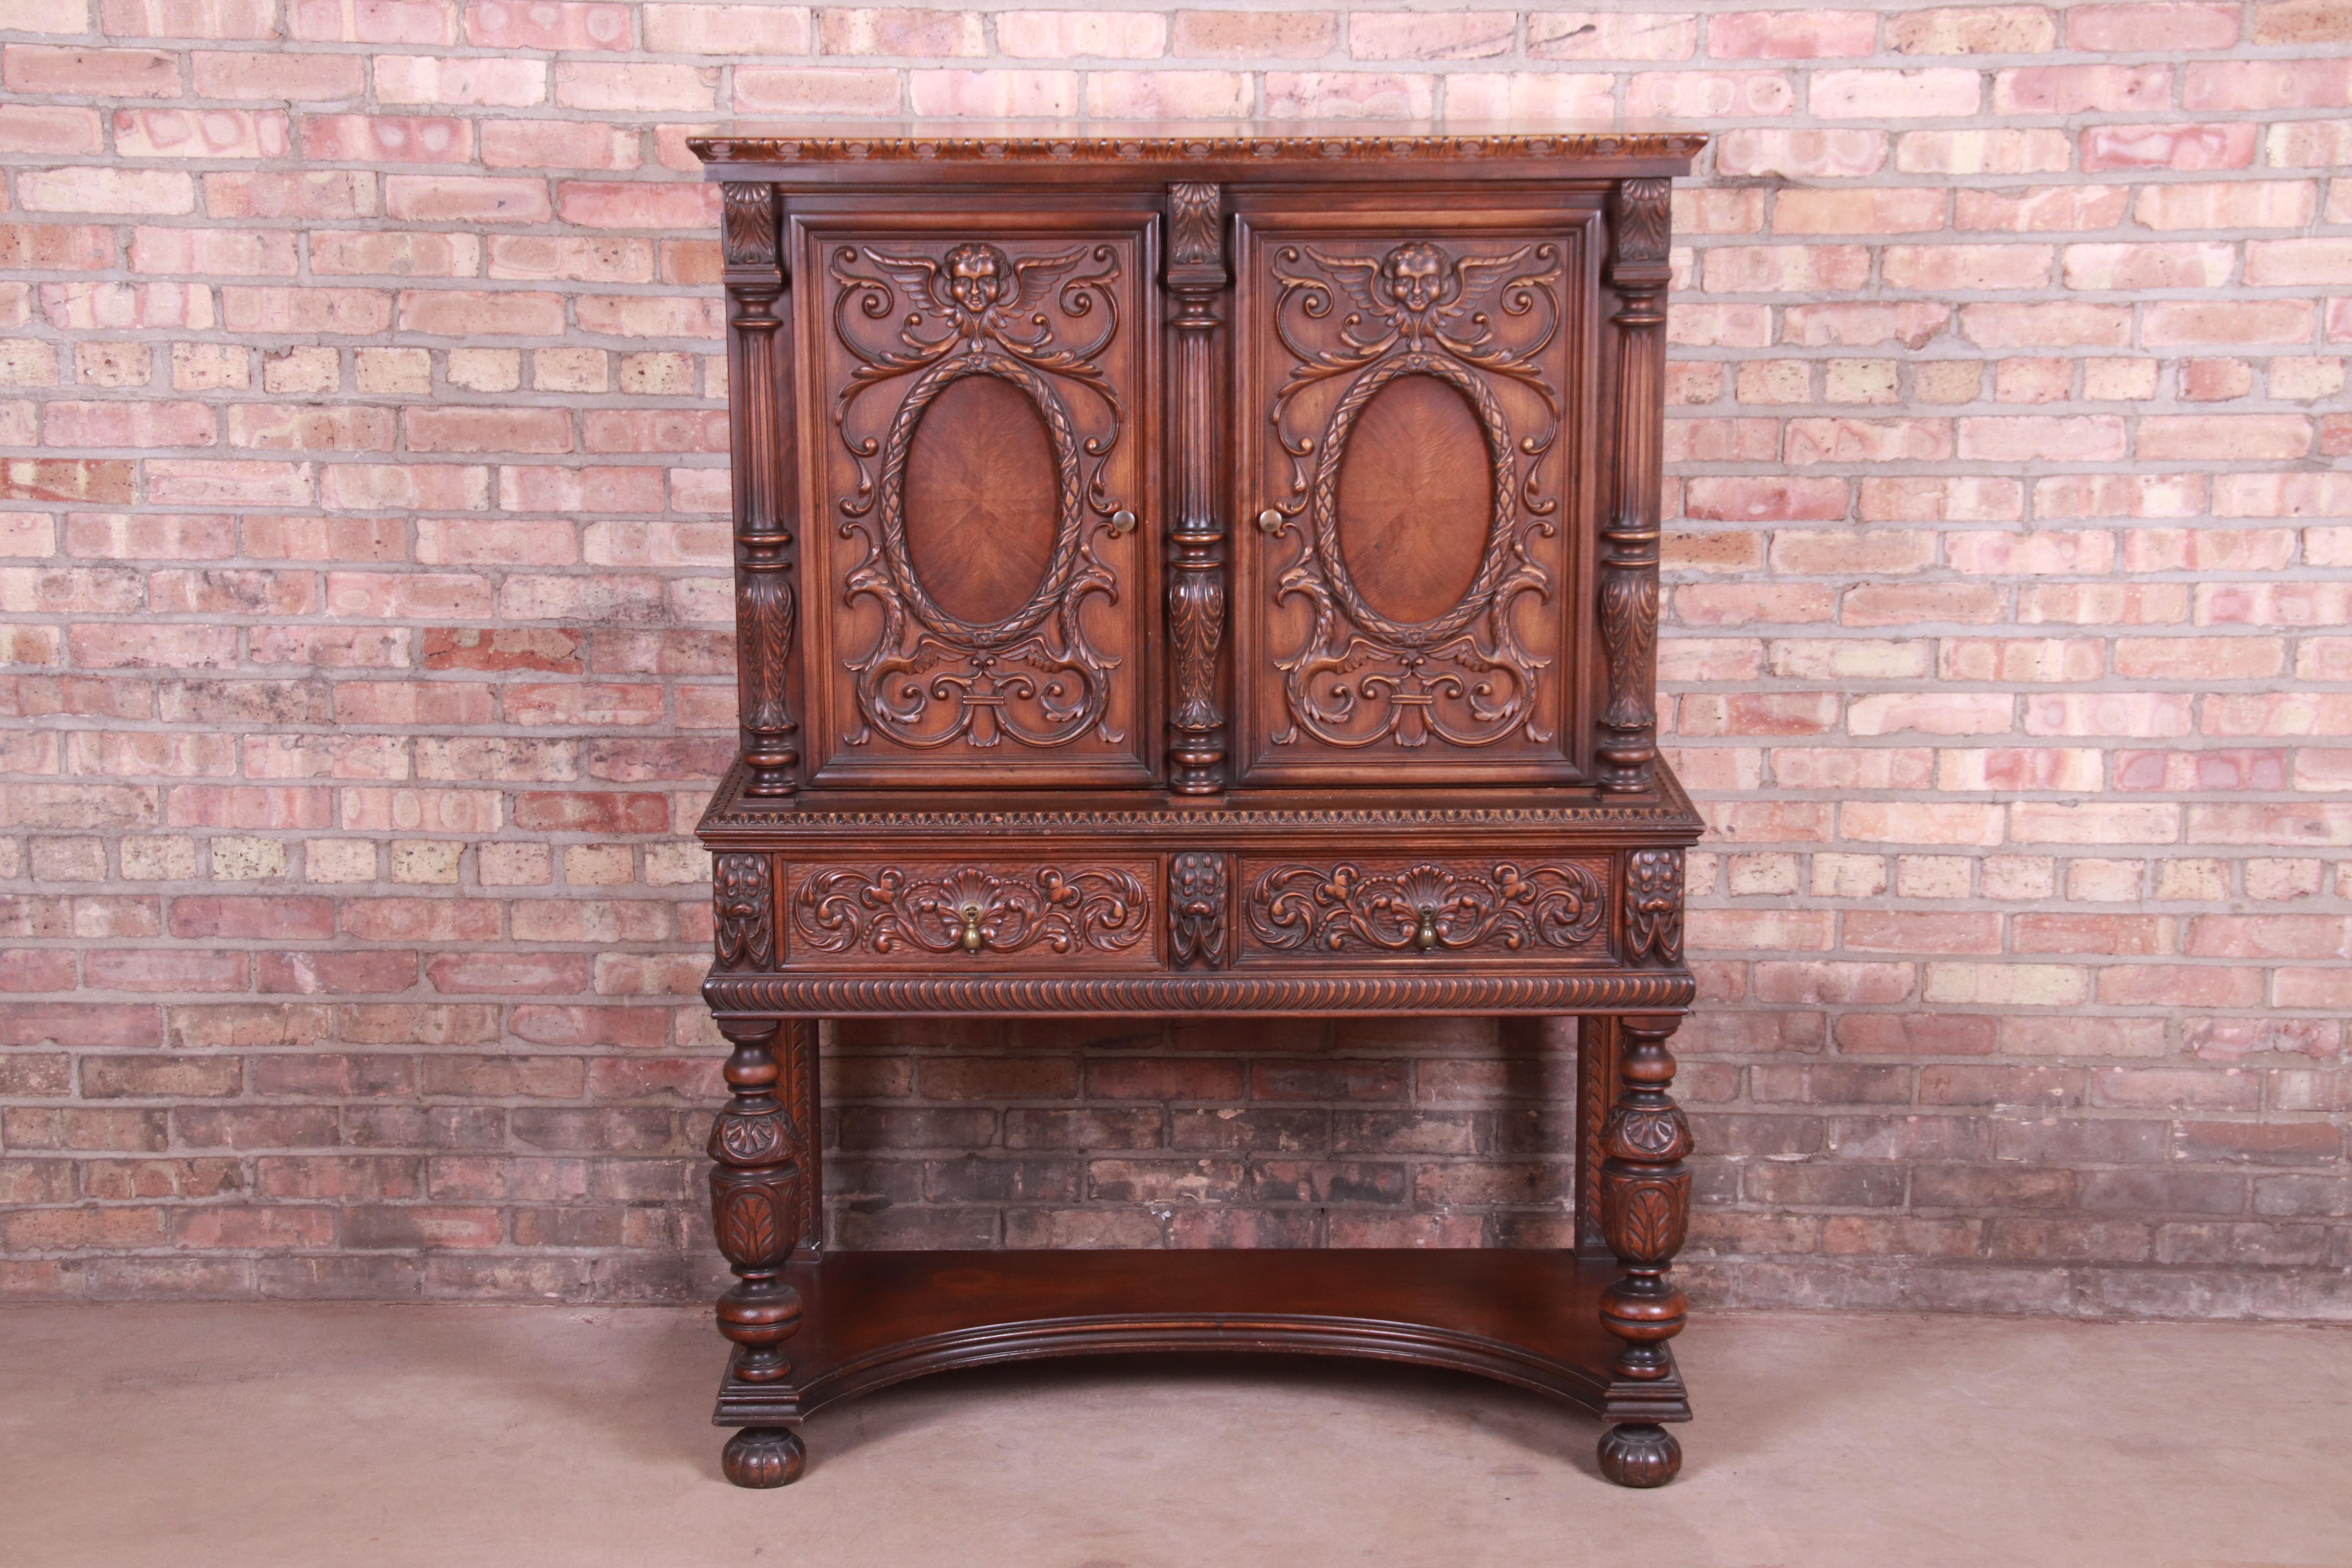 A gorgeous antique Baroque Renaissance carved walnut sideboard hutch, bar cabinet, or bookcase,

Early 20th century

Walnut, with ornate carvings of faces, birds, and foliage. Original brass hardware.

Measures: 44